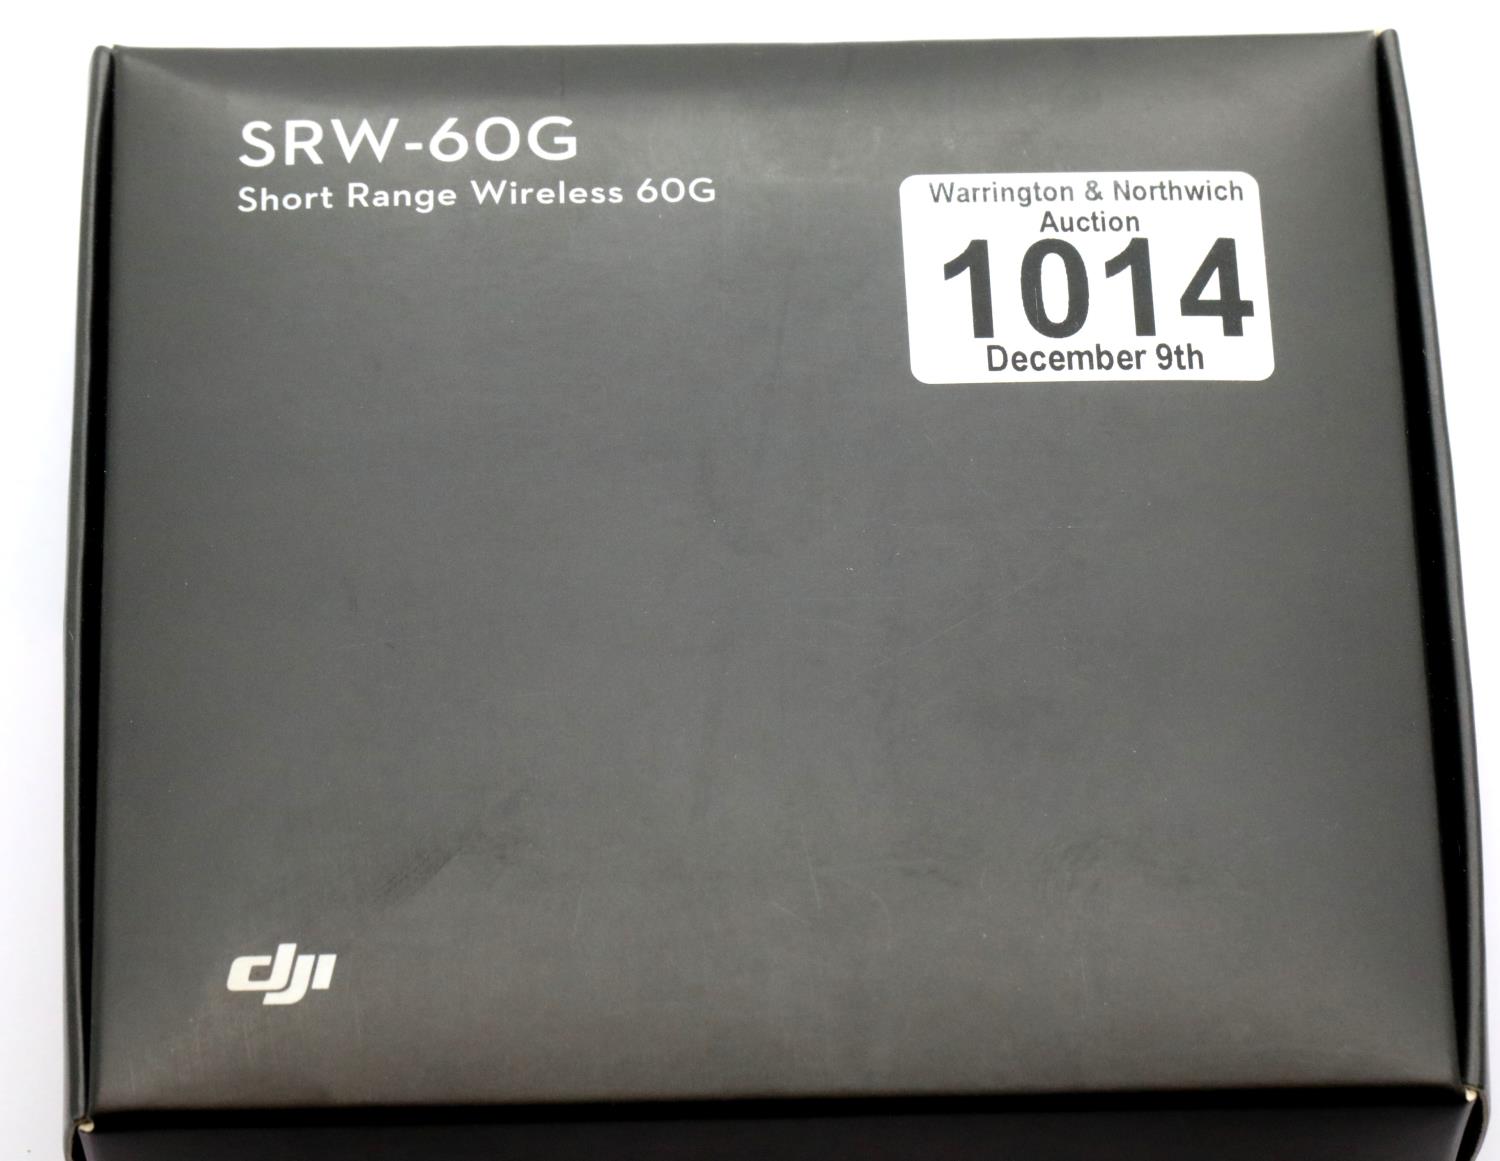 dji SRW-60G Short Range Wireless HD video link, unopened. P&P Group 1 (£14+VAT for the first lot and